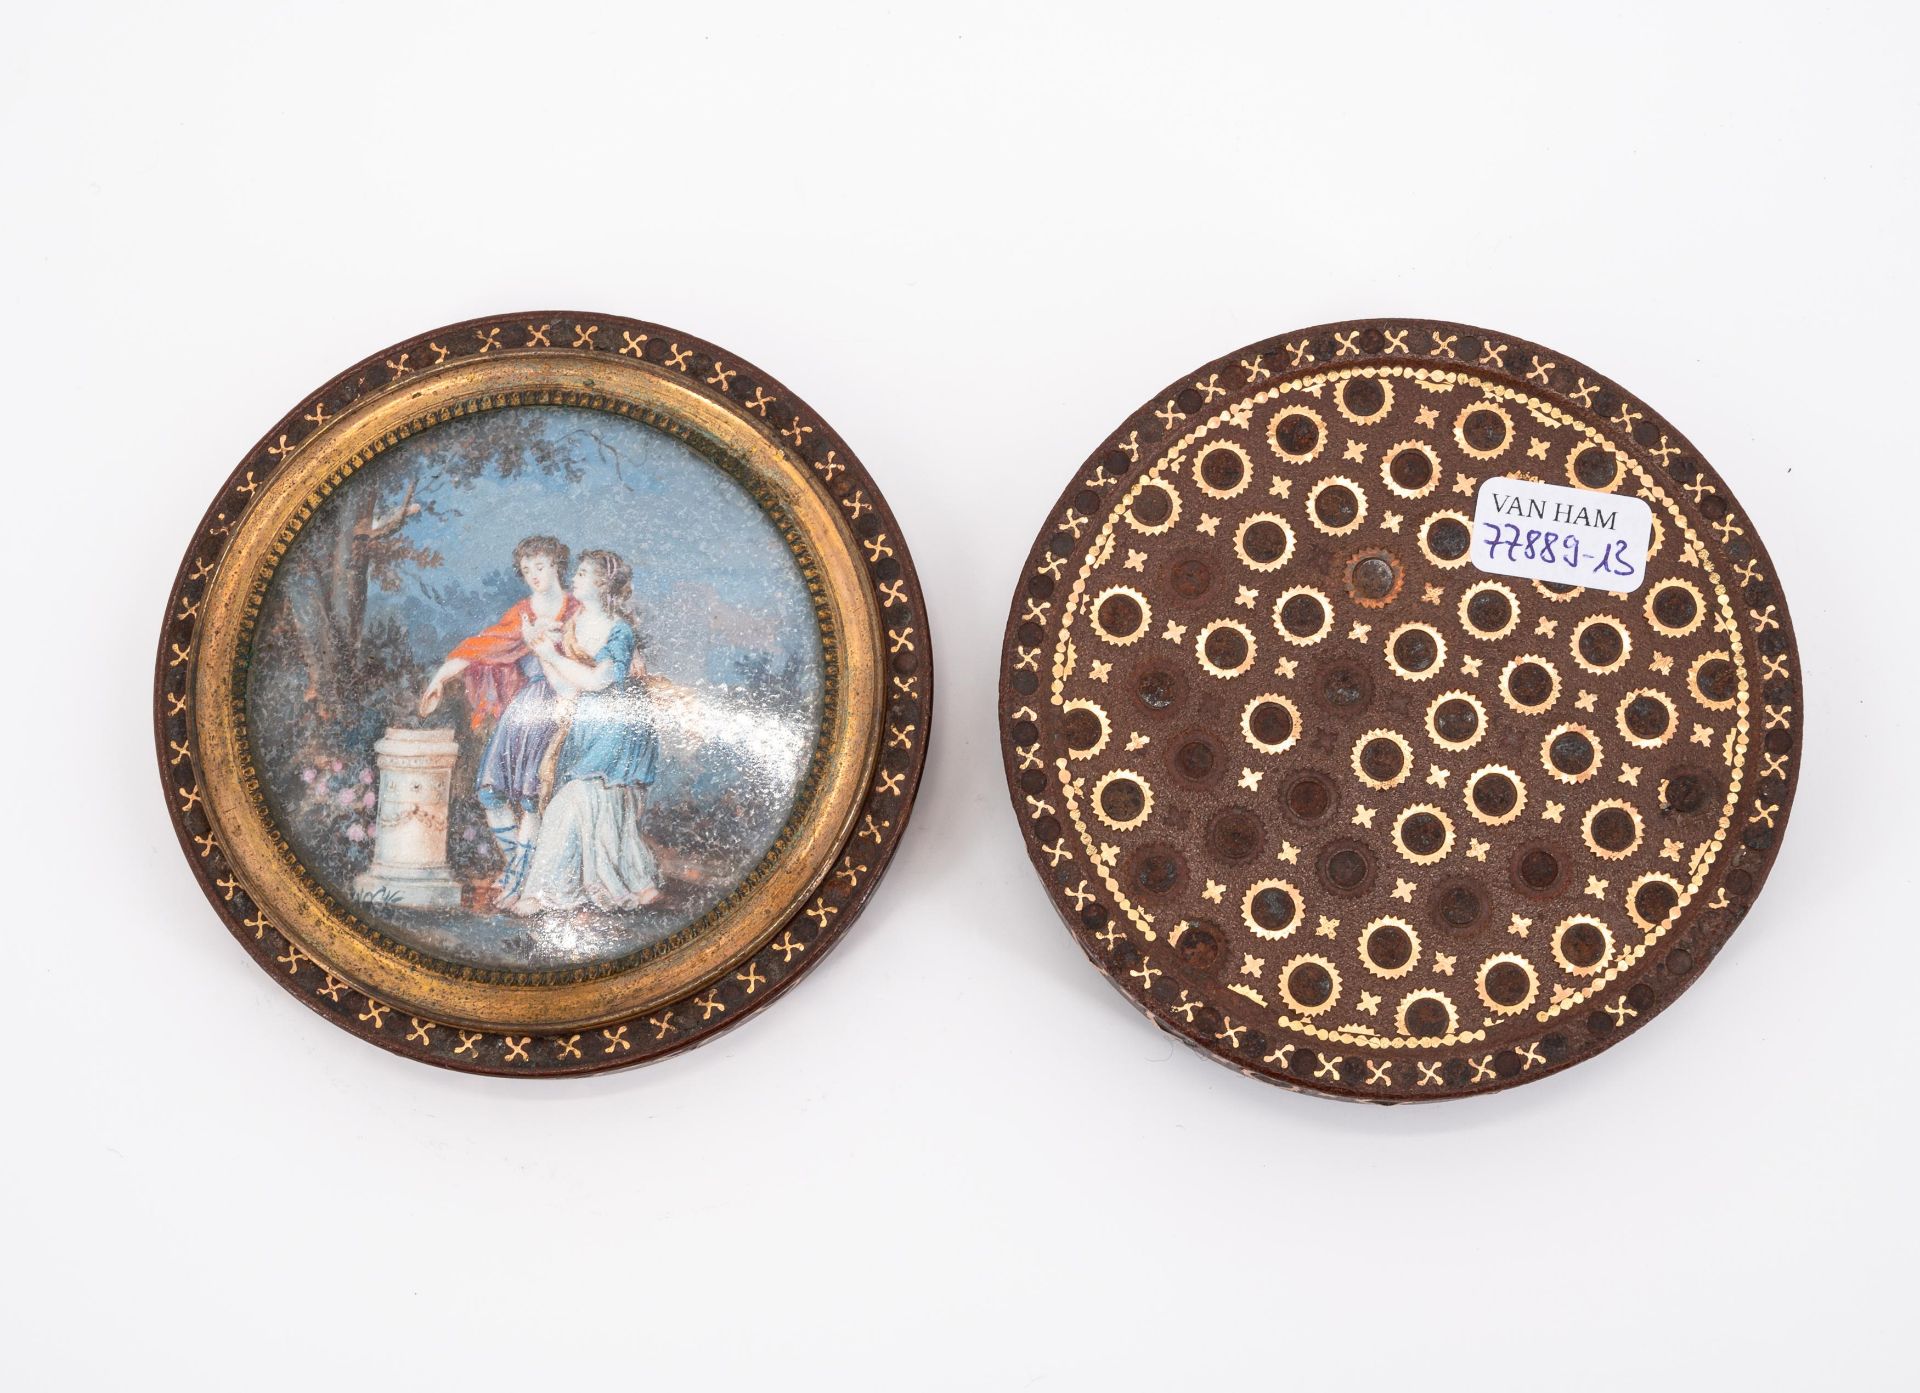 ROUND METAL BOX WITH COUPLE IN PARK LANDSCAPE - Image 3 of 3